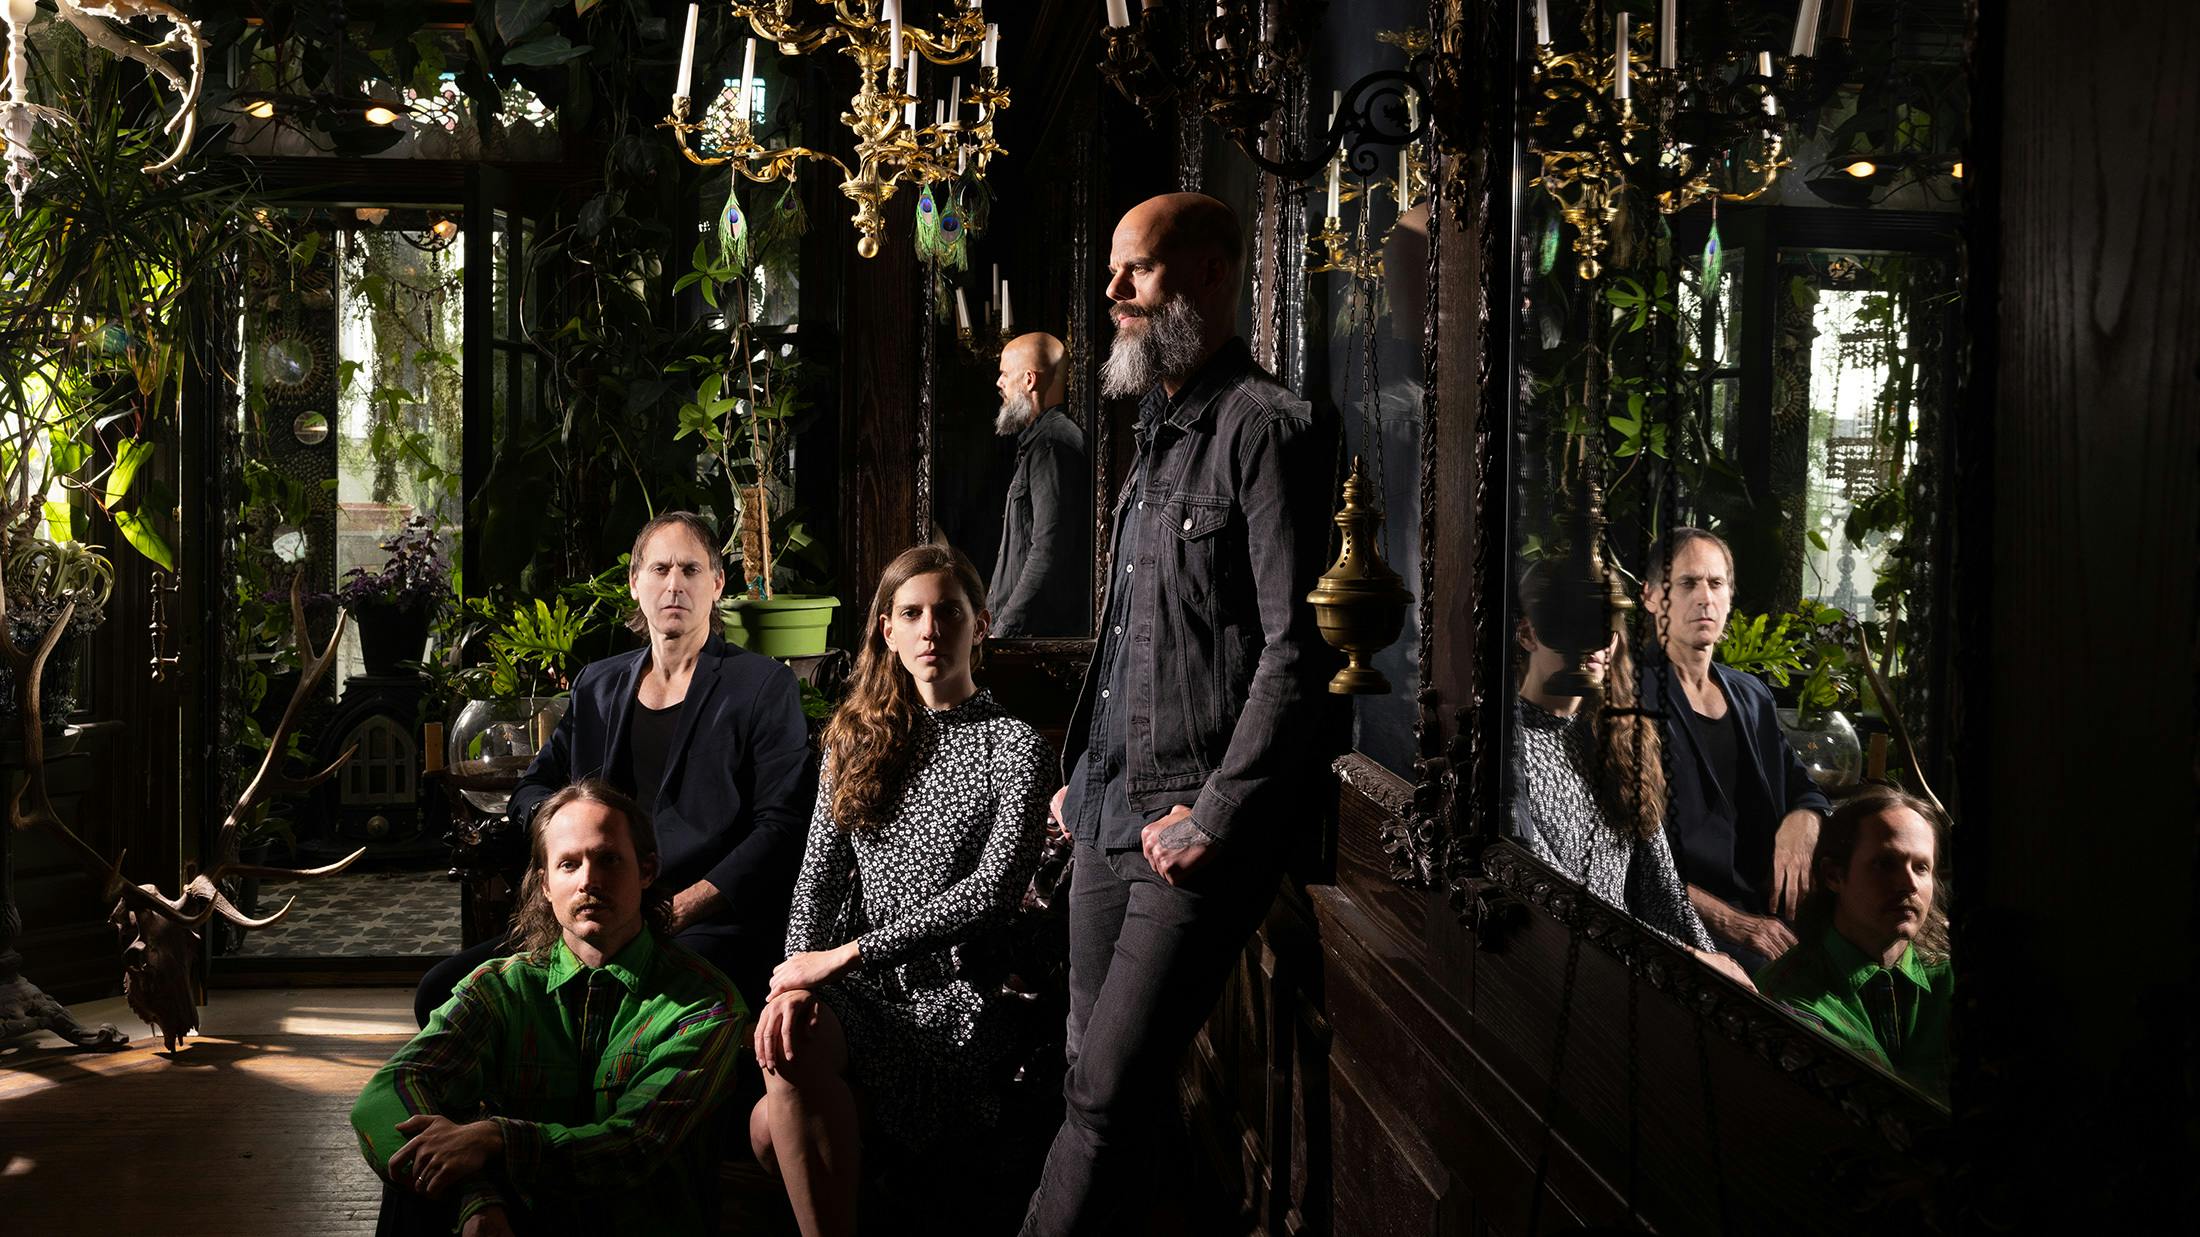 Baroness: “Music can take our hurts and allow us to springboard back into the brightness, to enjoy life with all the more dimension and contrast”